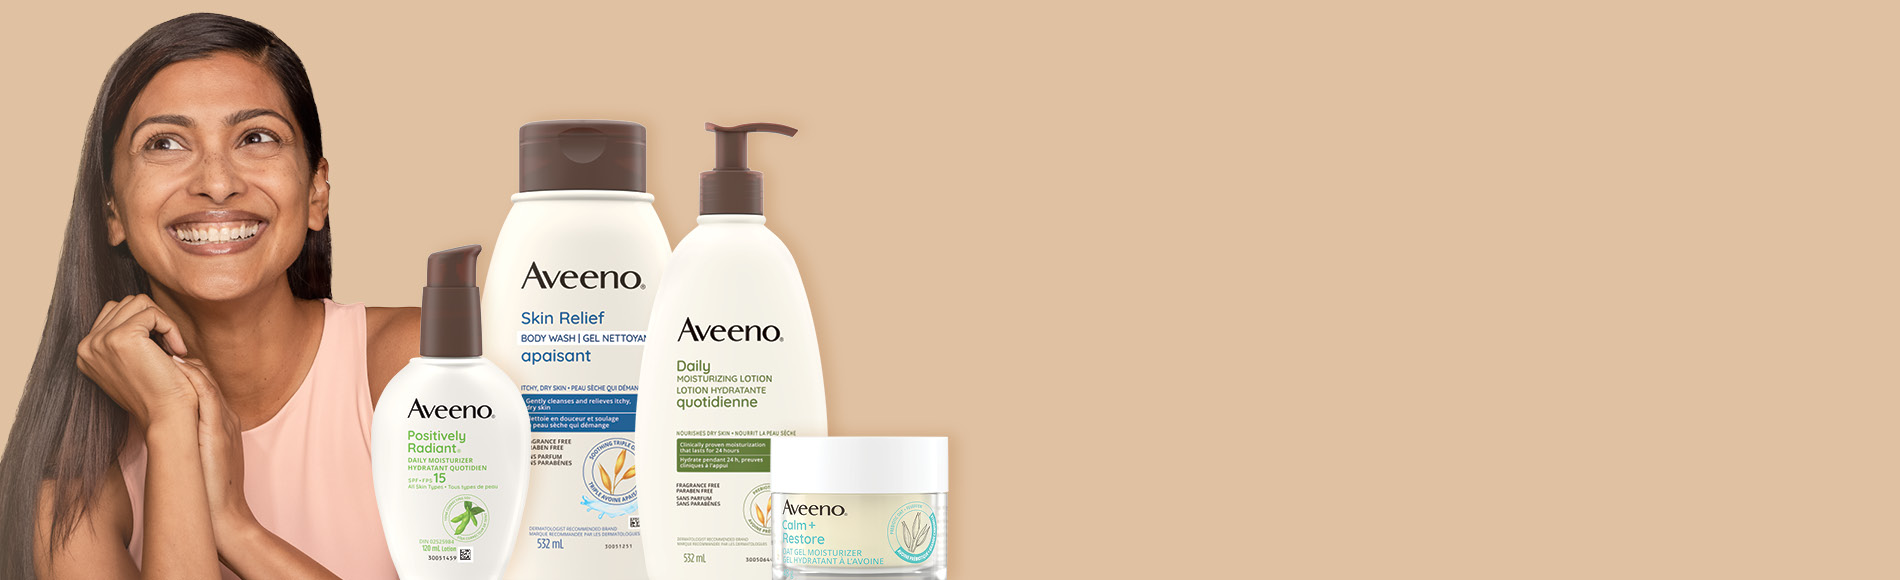 A banner with a woman with long dark straight hair smiling and four Aveeno® Body and Face Skincare products